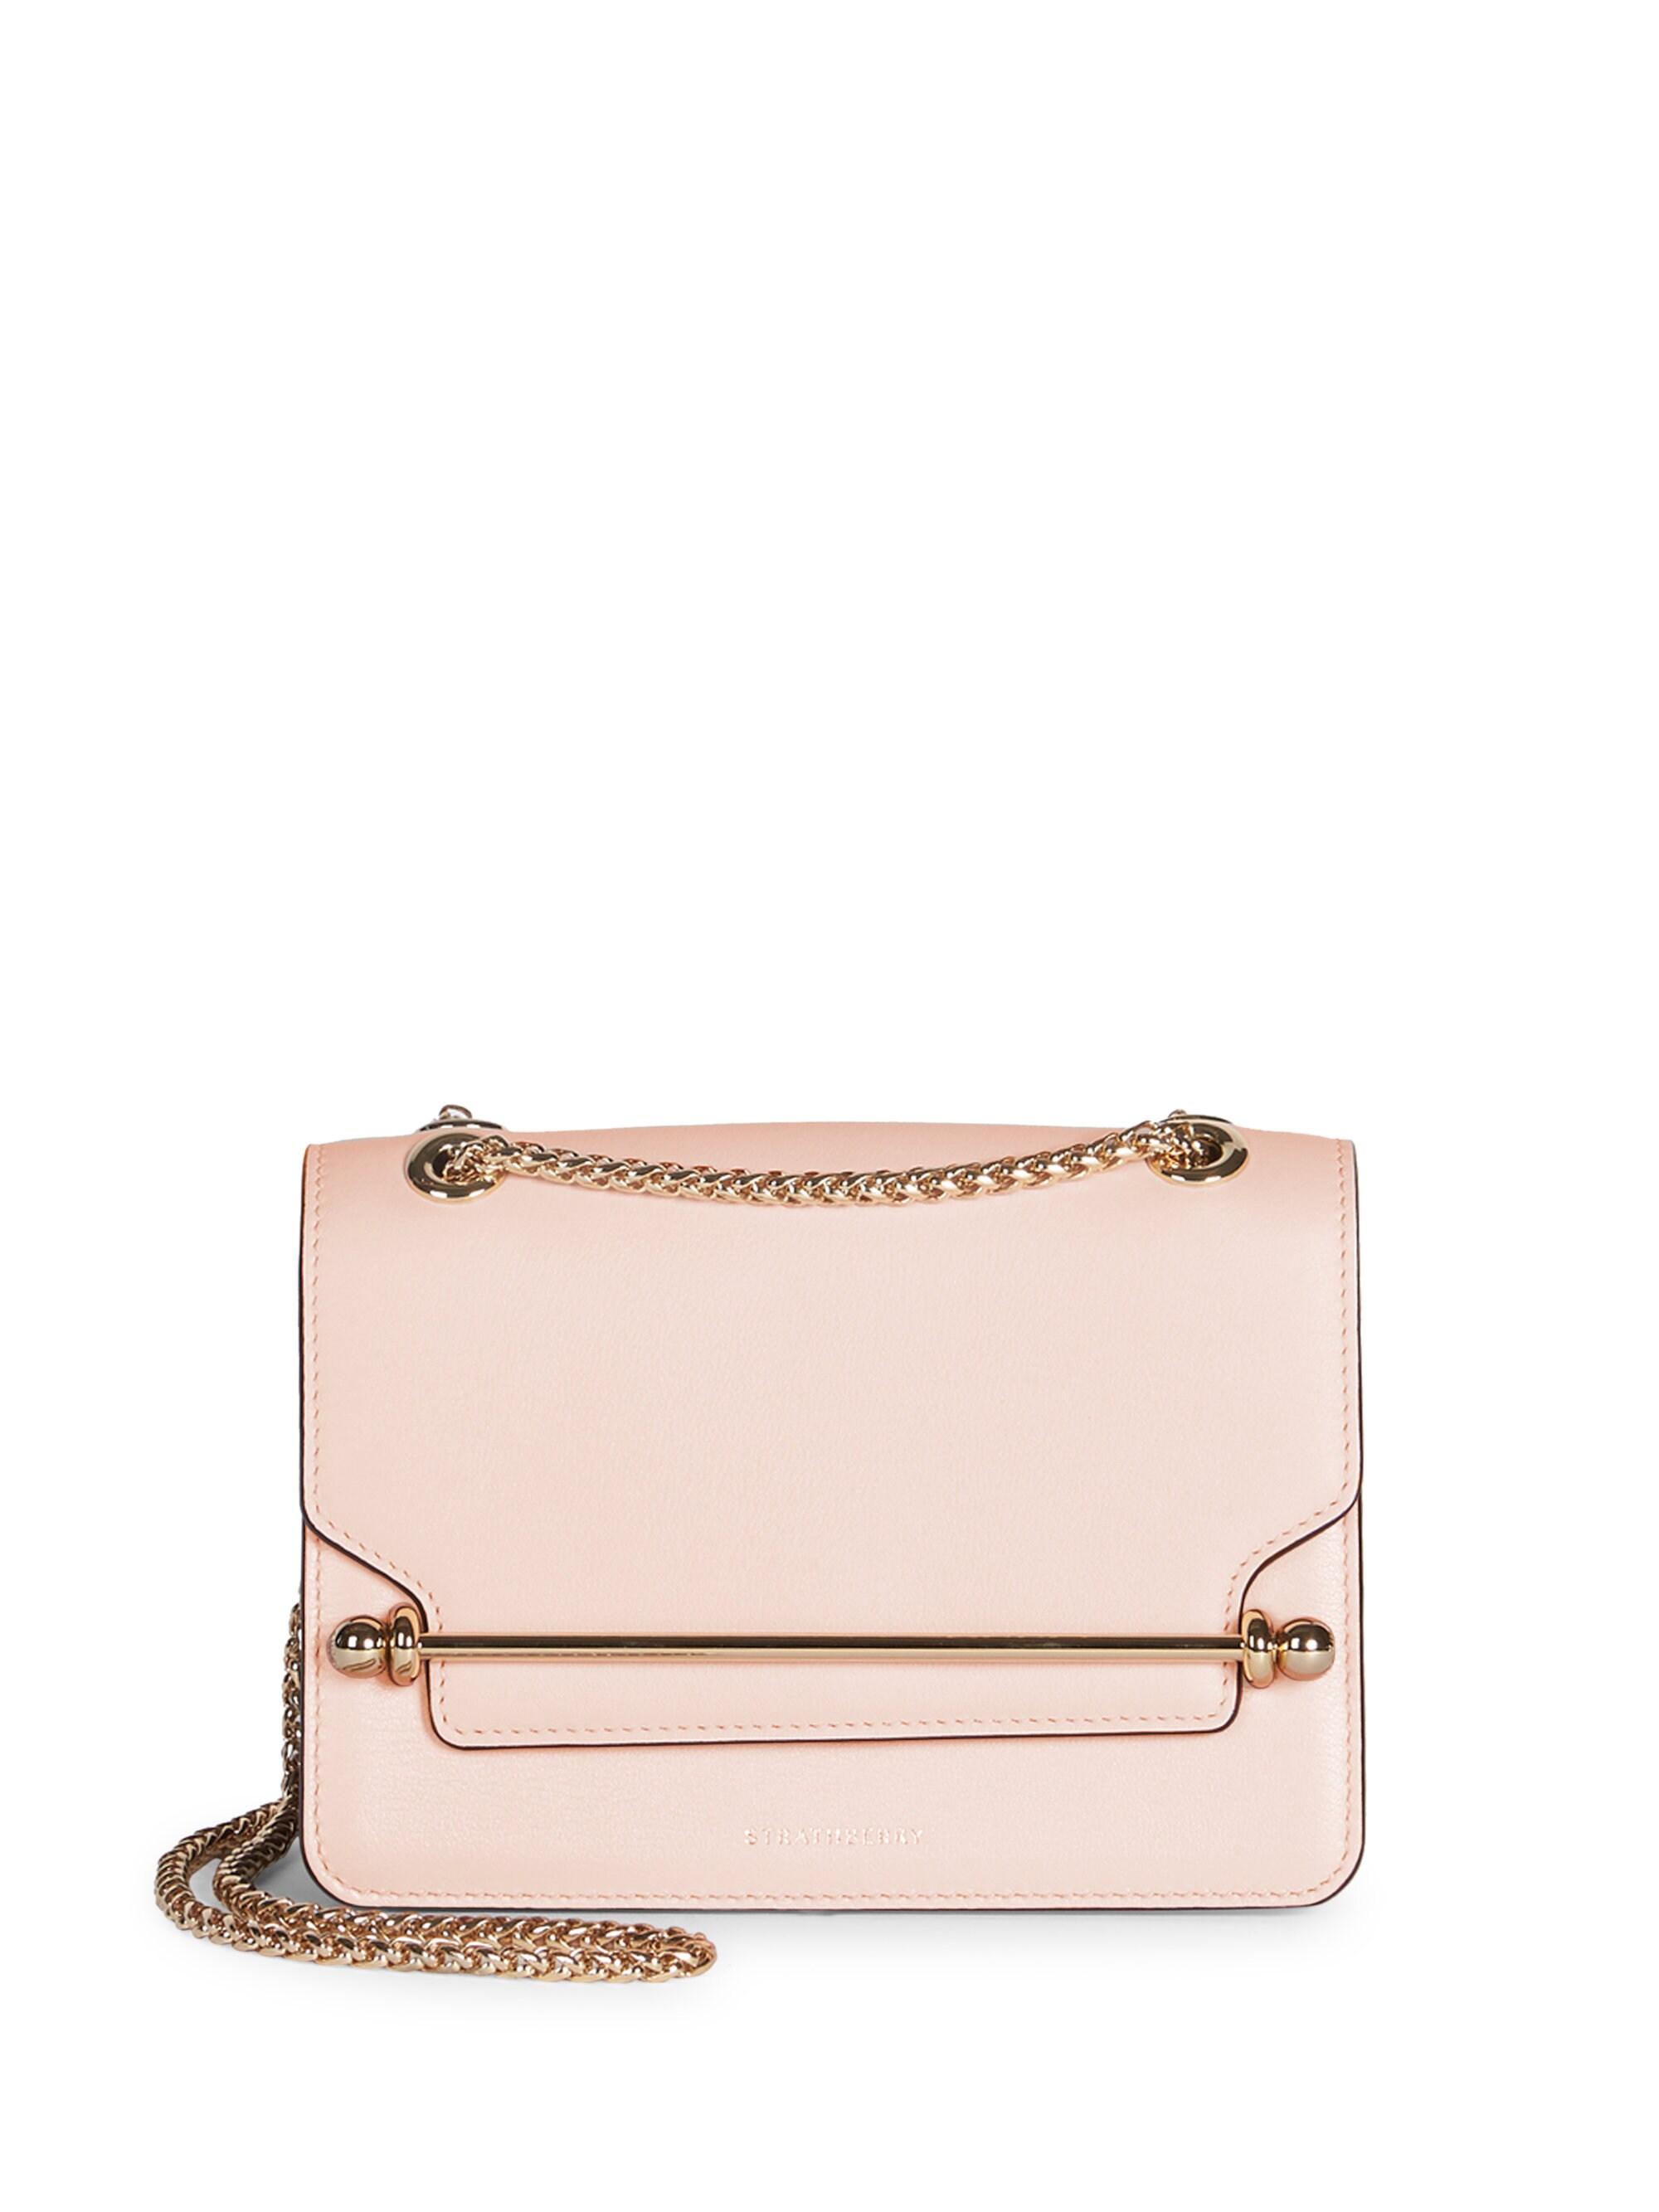 Strathberry Mini East/west Leather Chain Shoulder Bag in Pink - Lyst